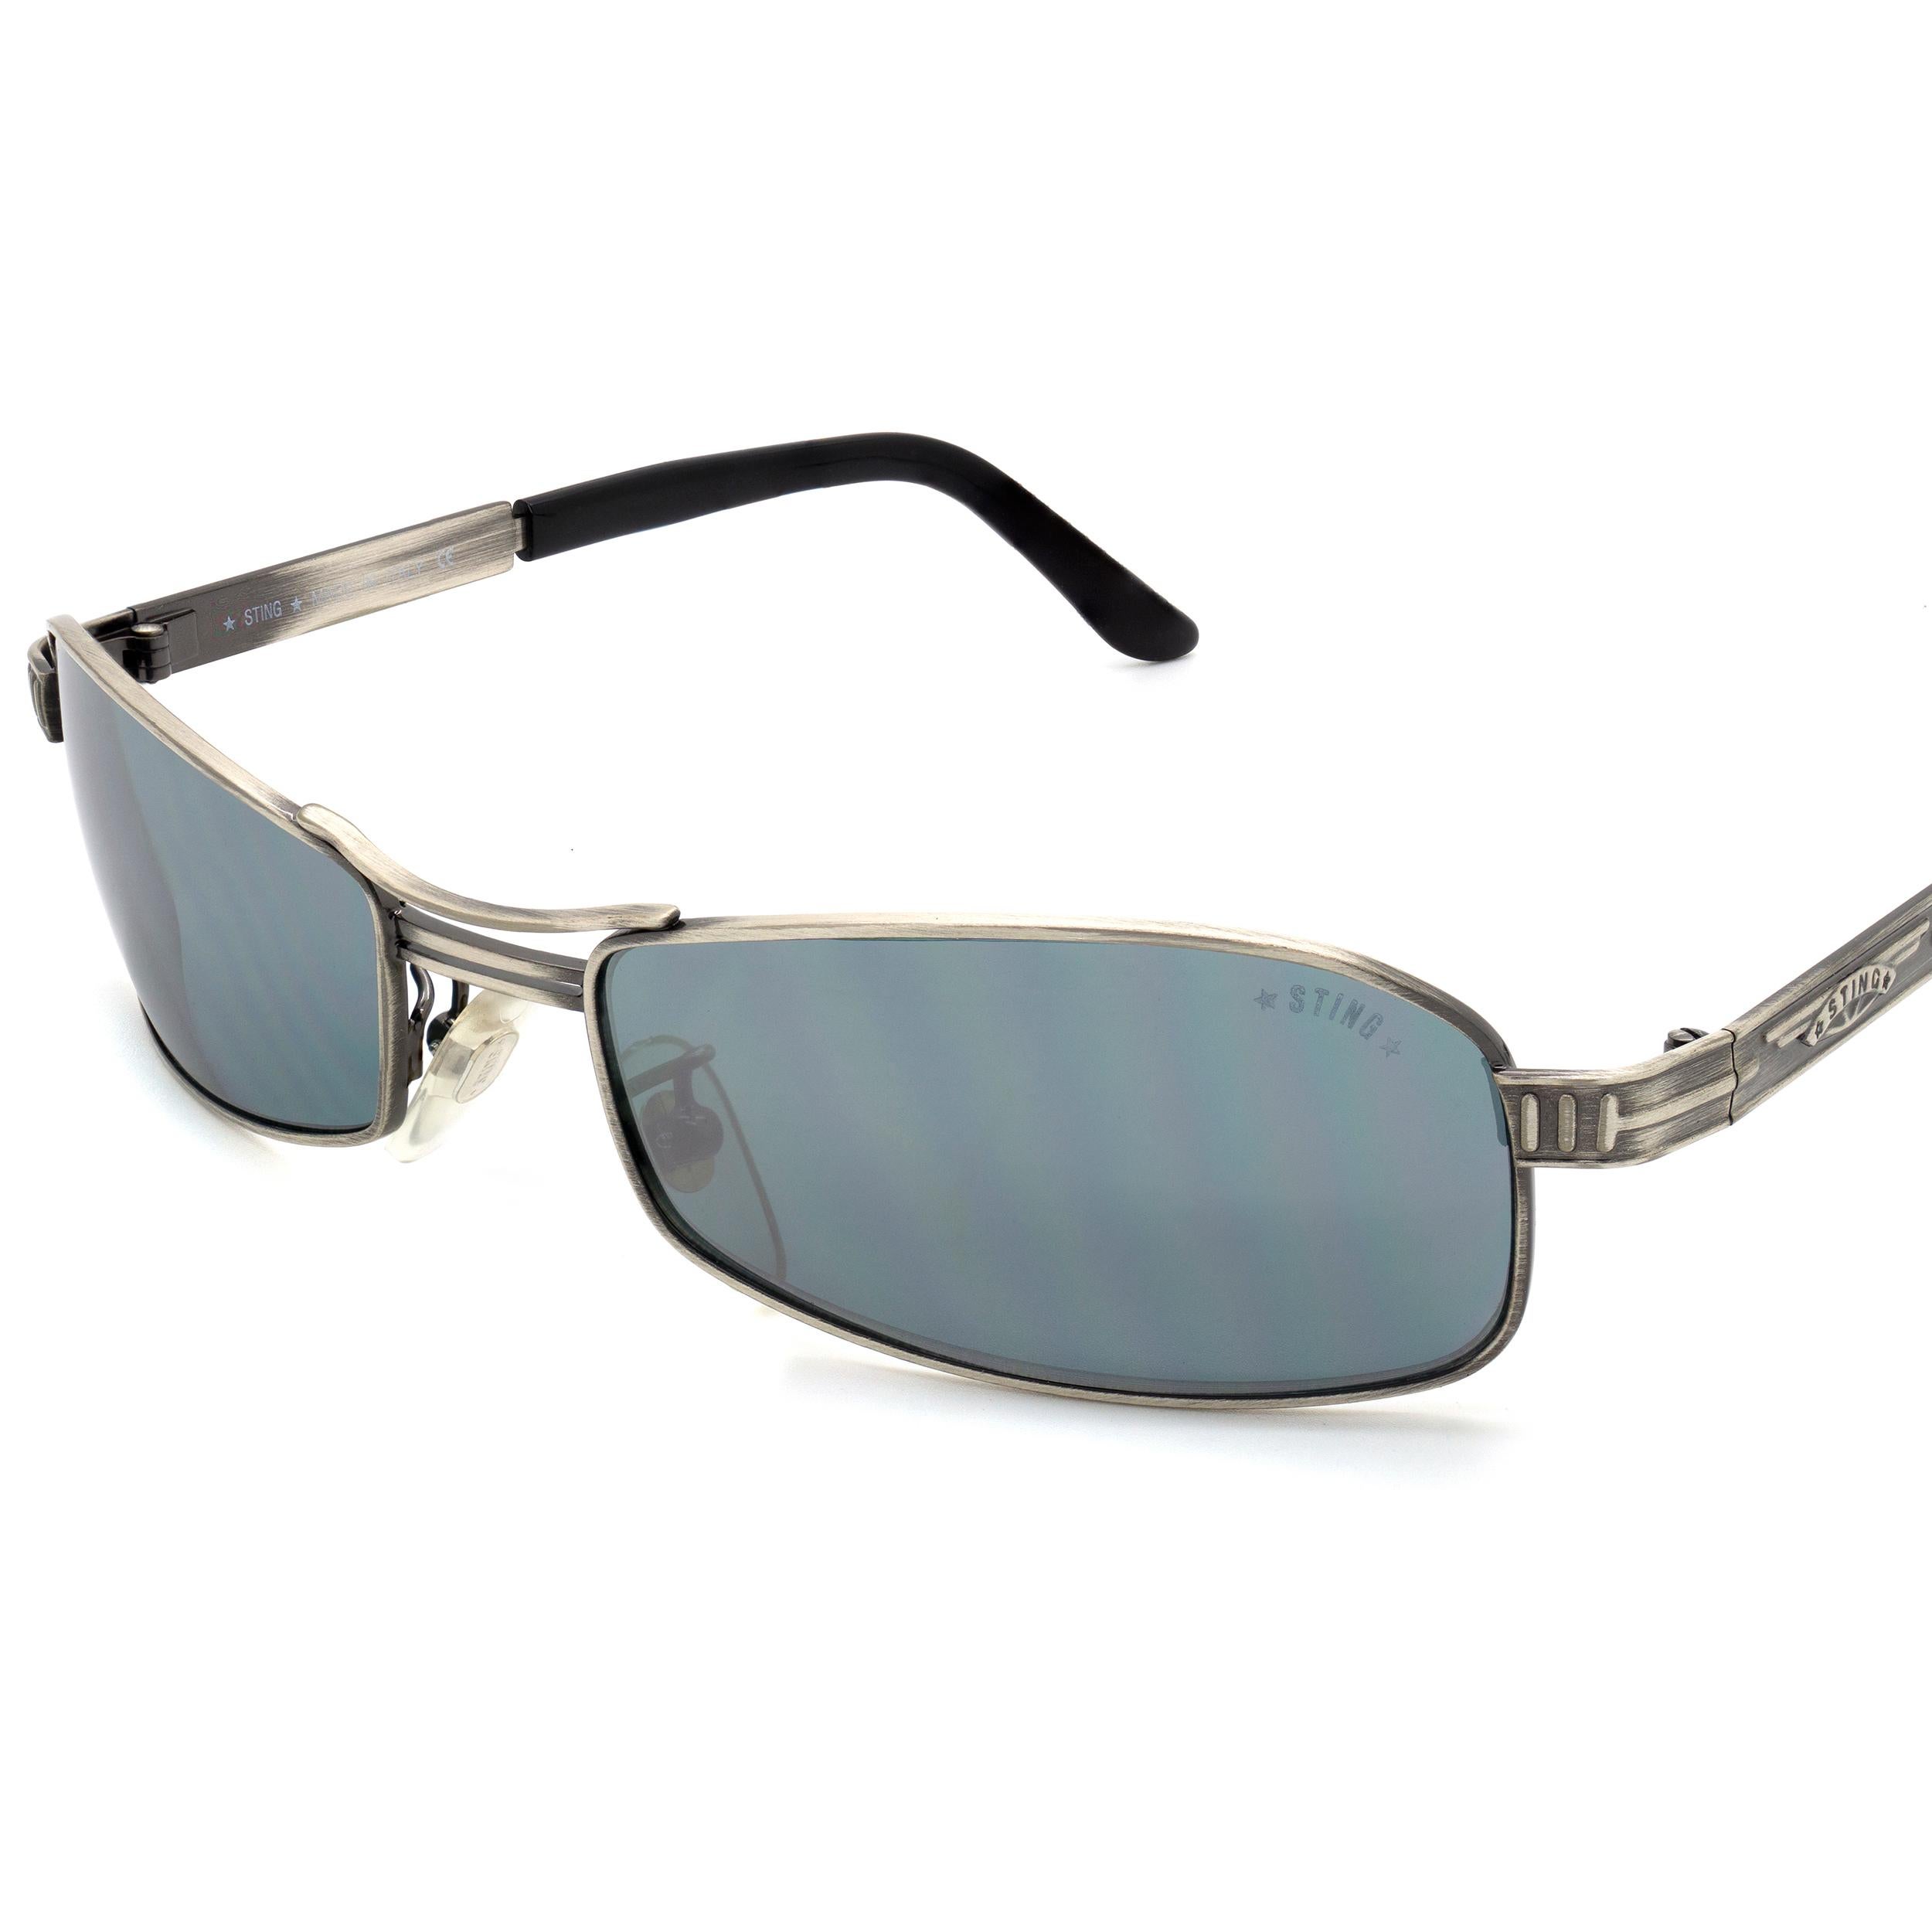 Gray Mirror aviator sunglasses by Sting, made in Italy For Sale